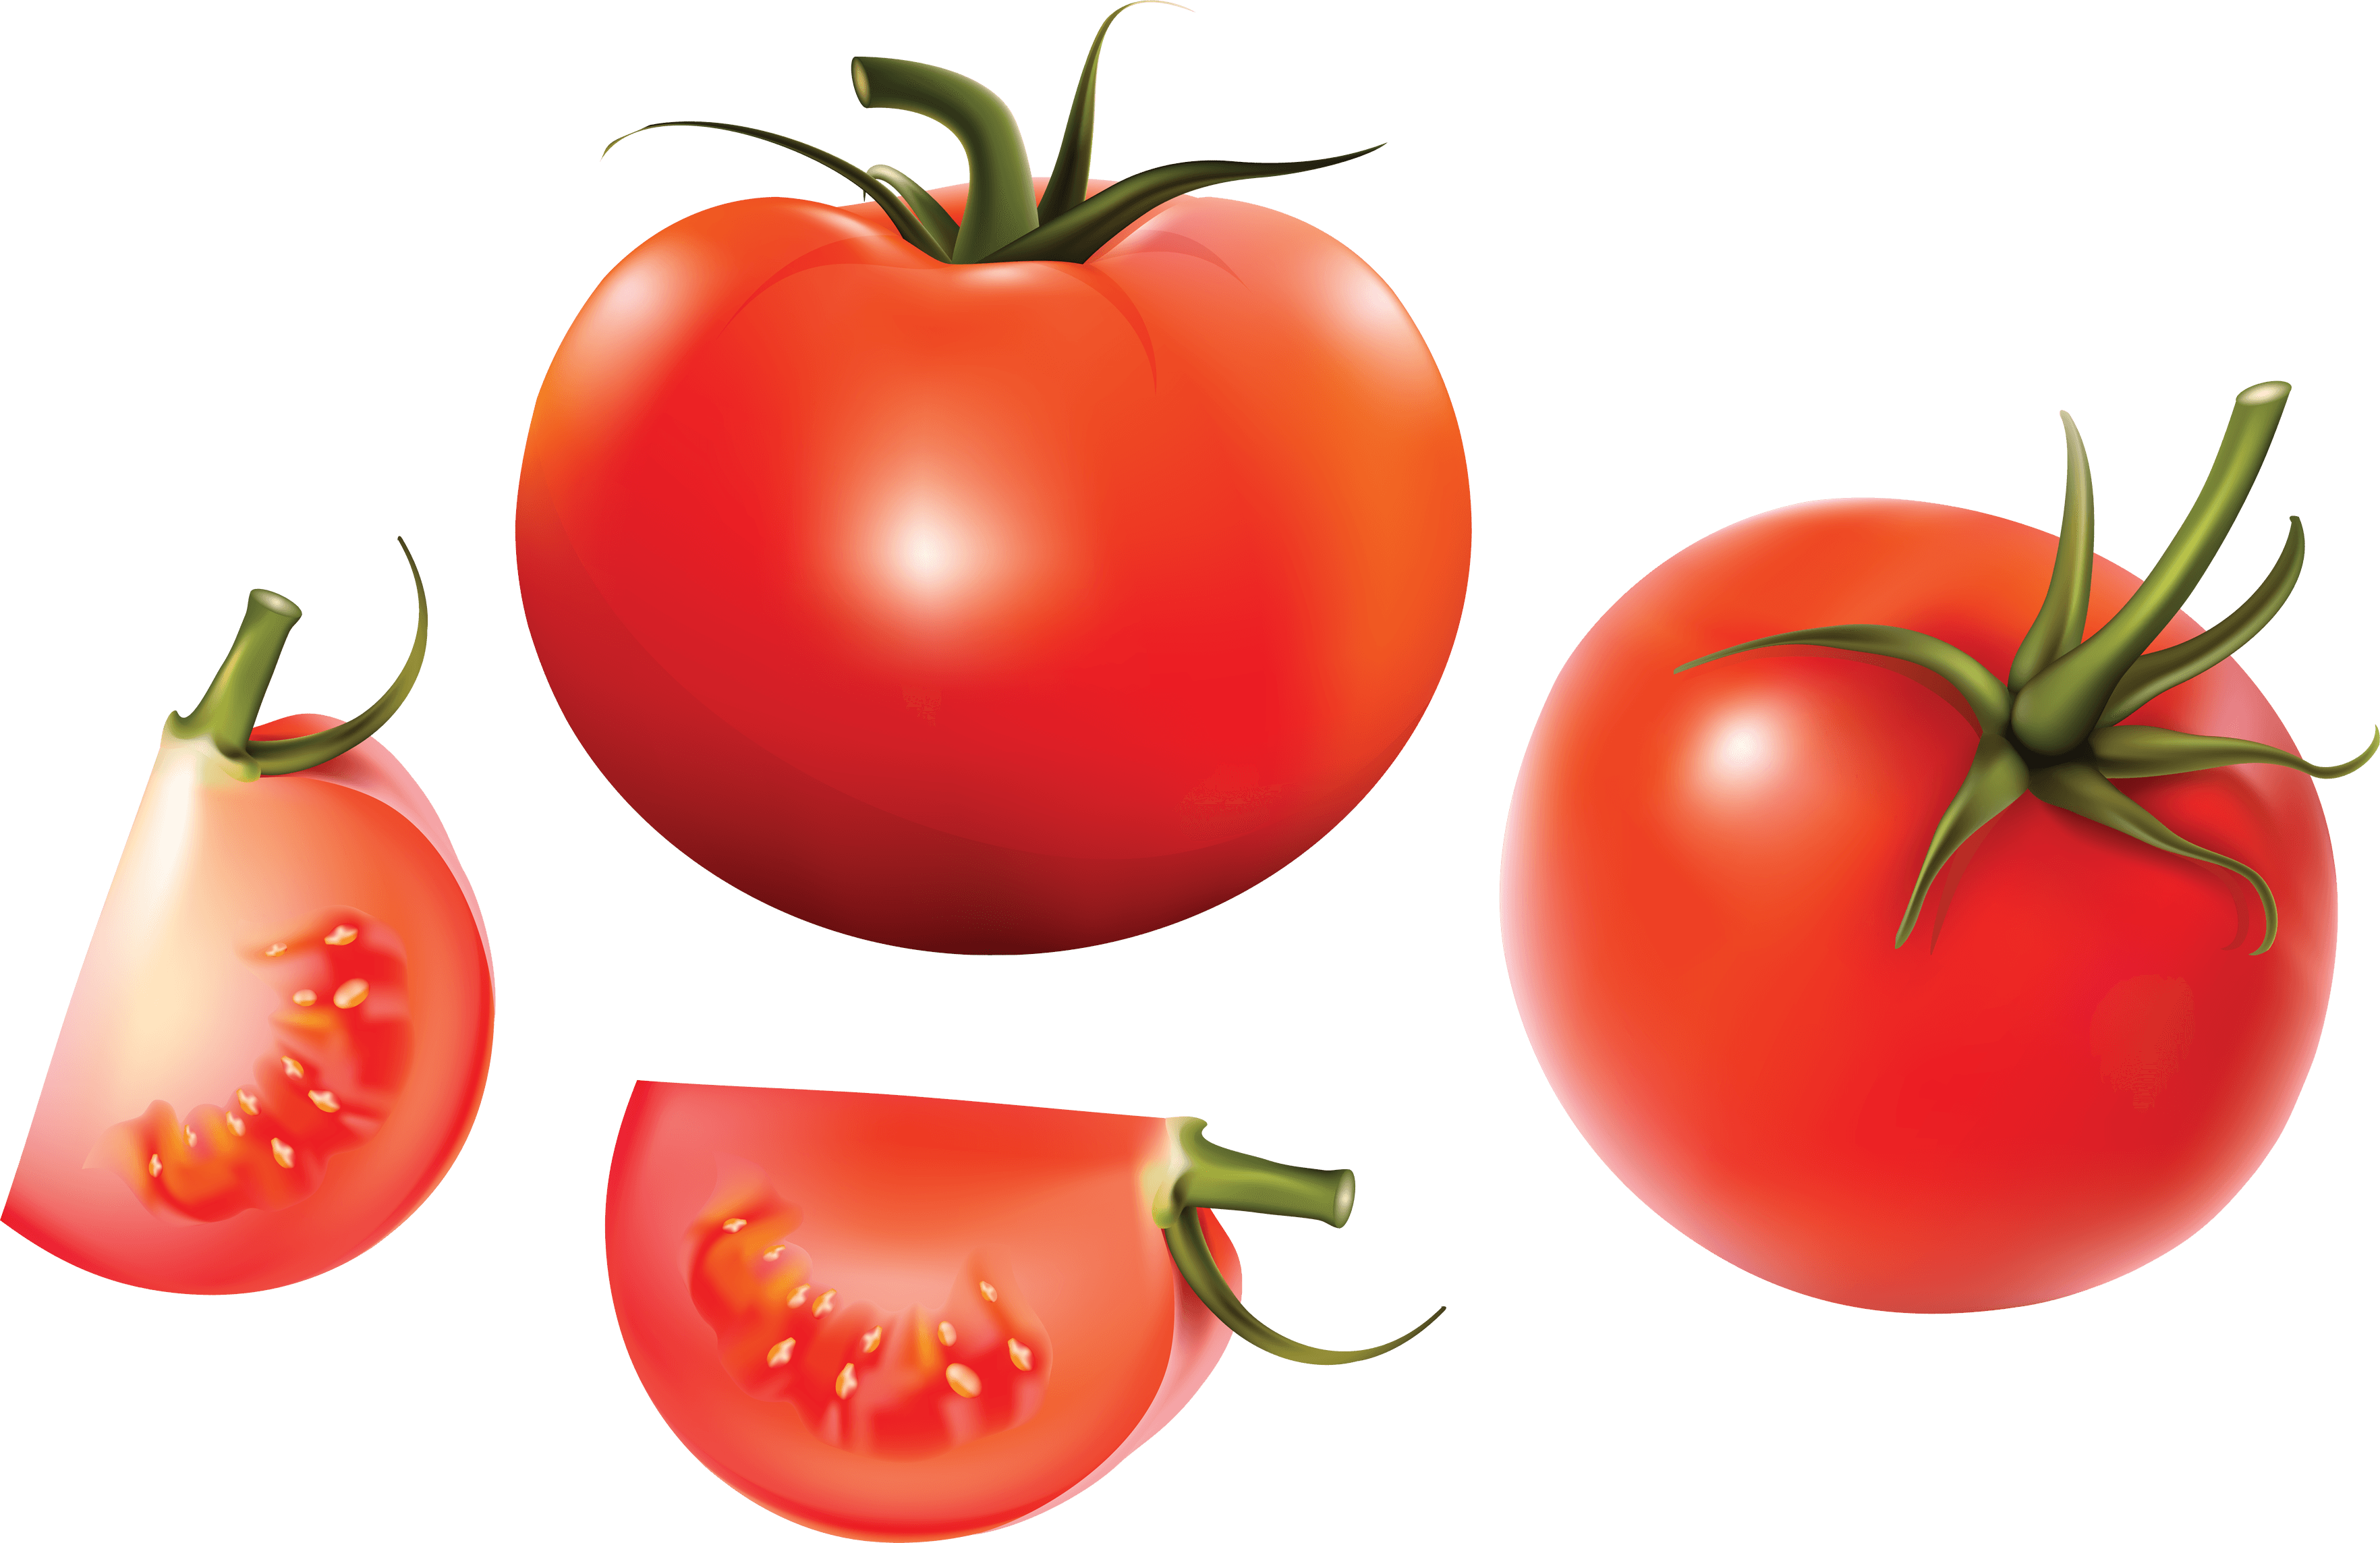 Tomato PNG HD - 130588